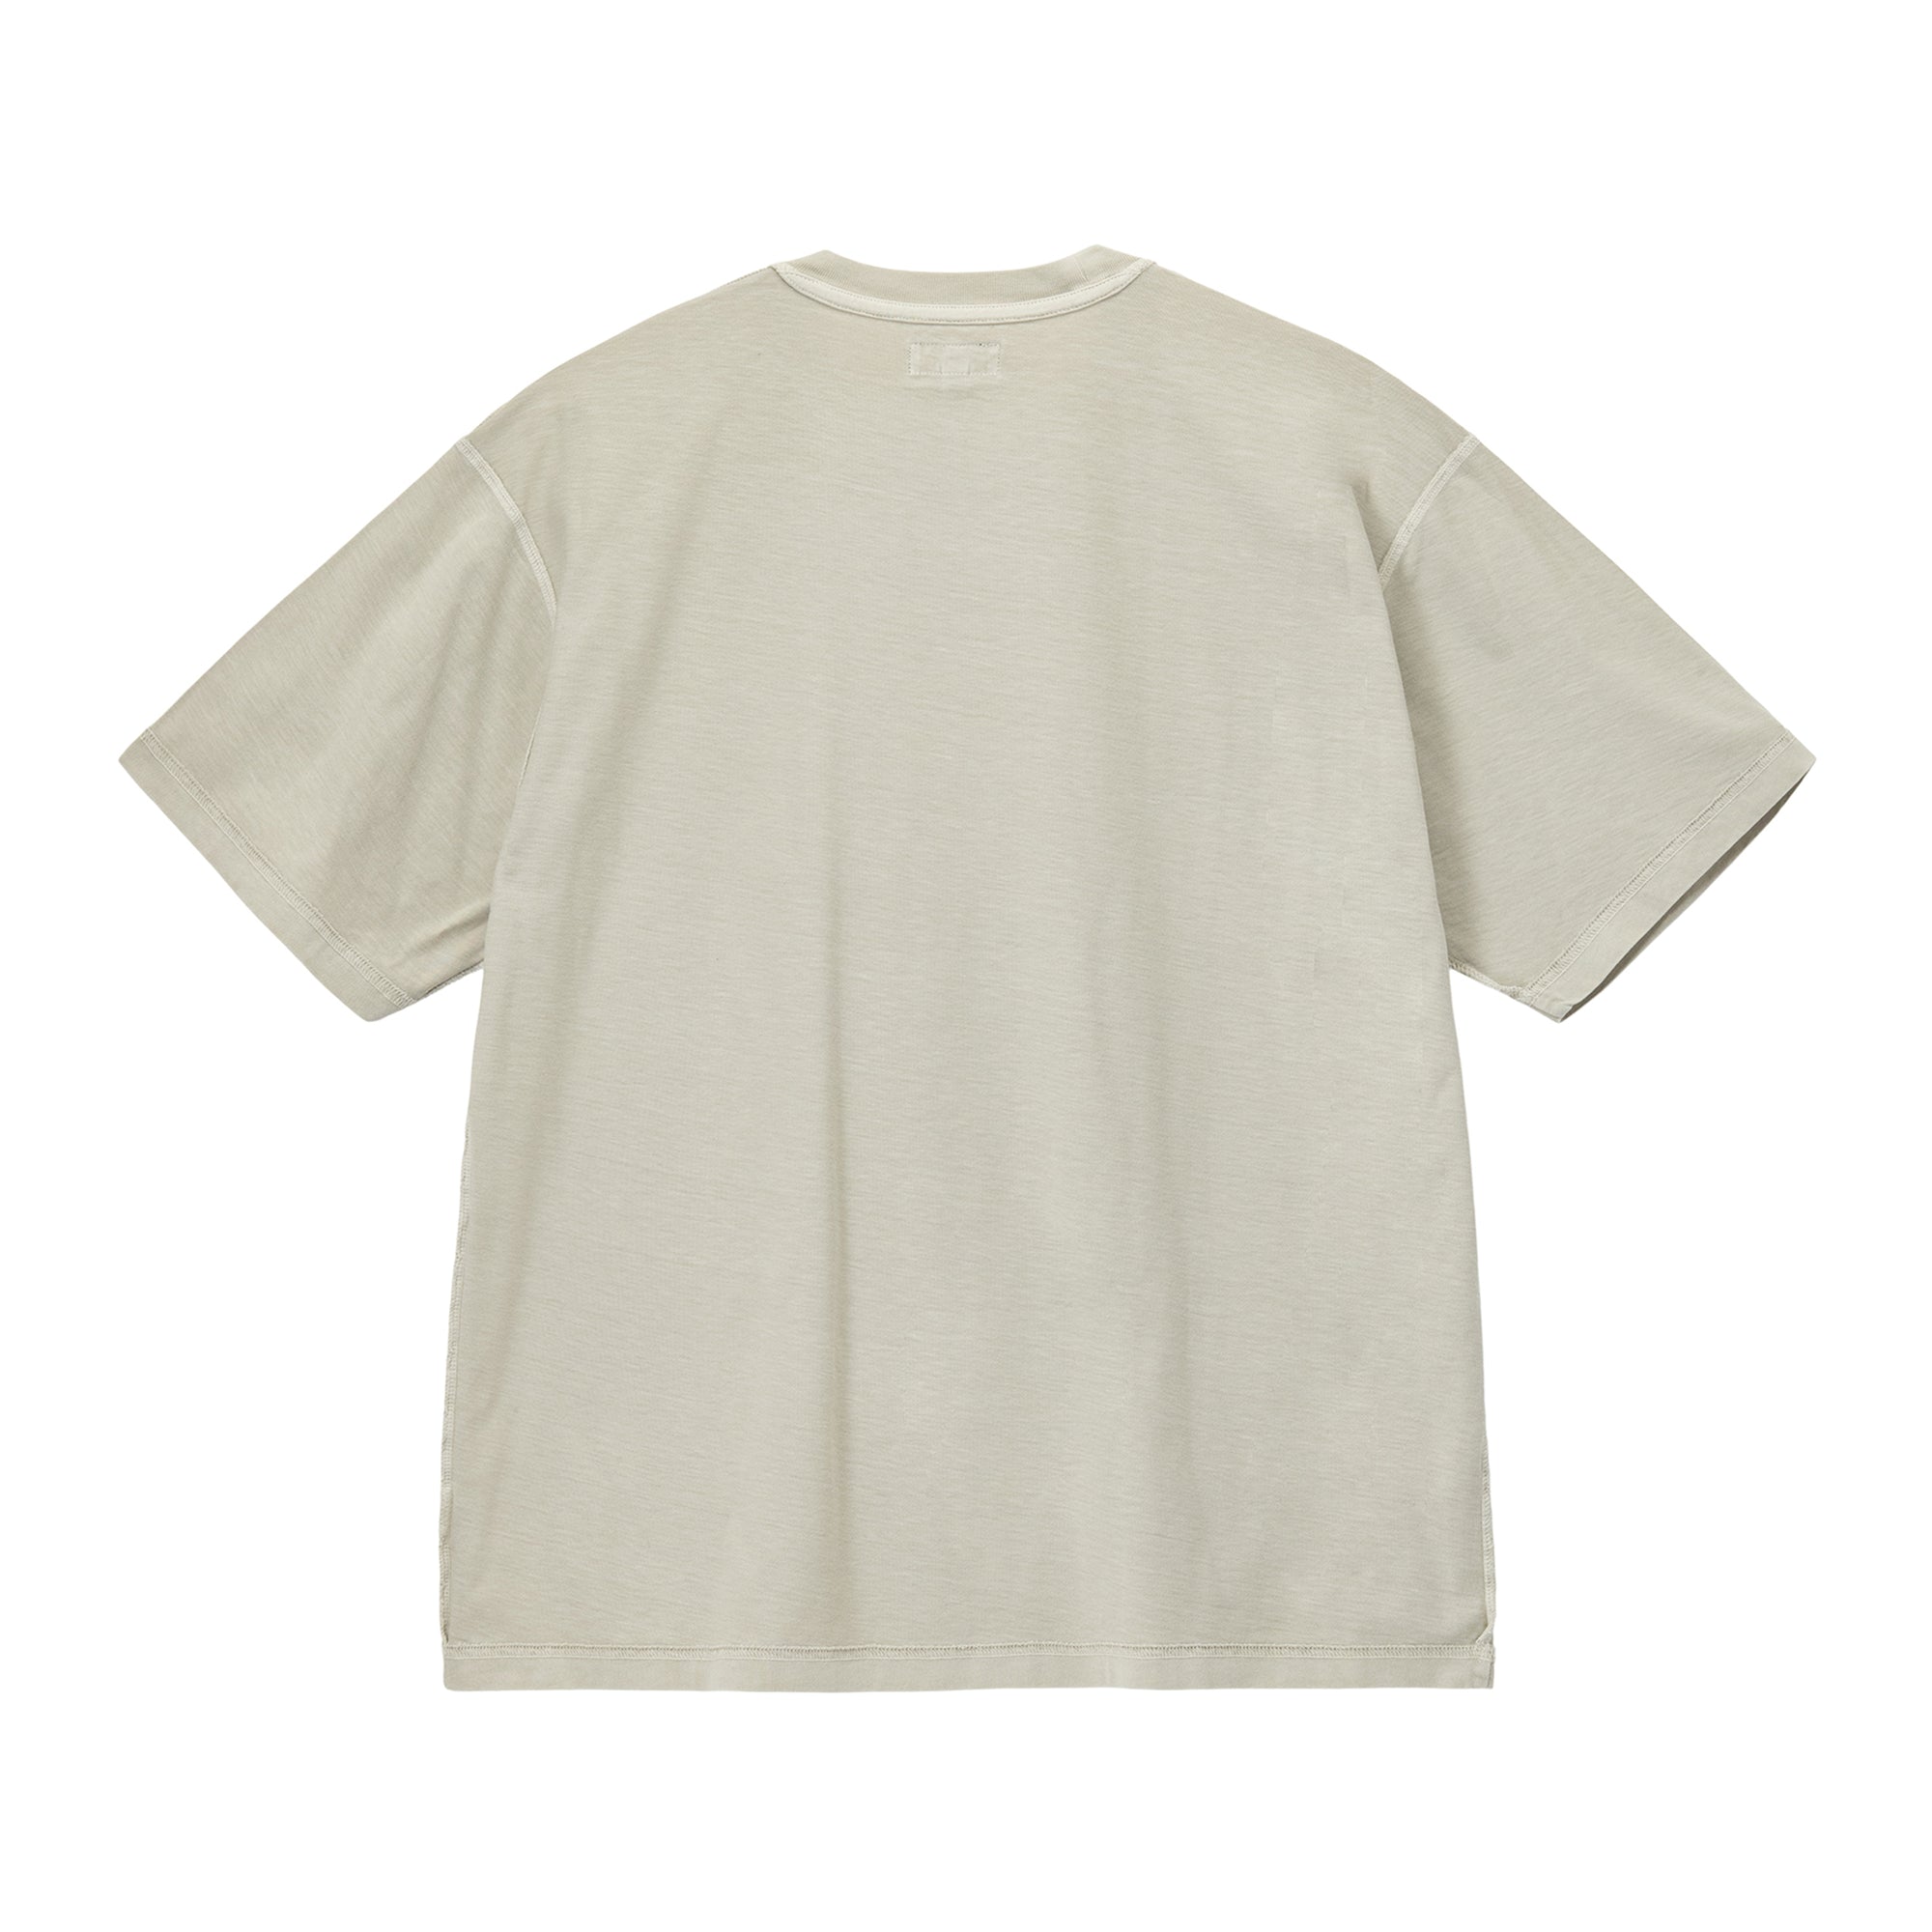 Stussy - Pig. Dyed Inside Out Crew - (Tan) view 2